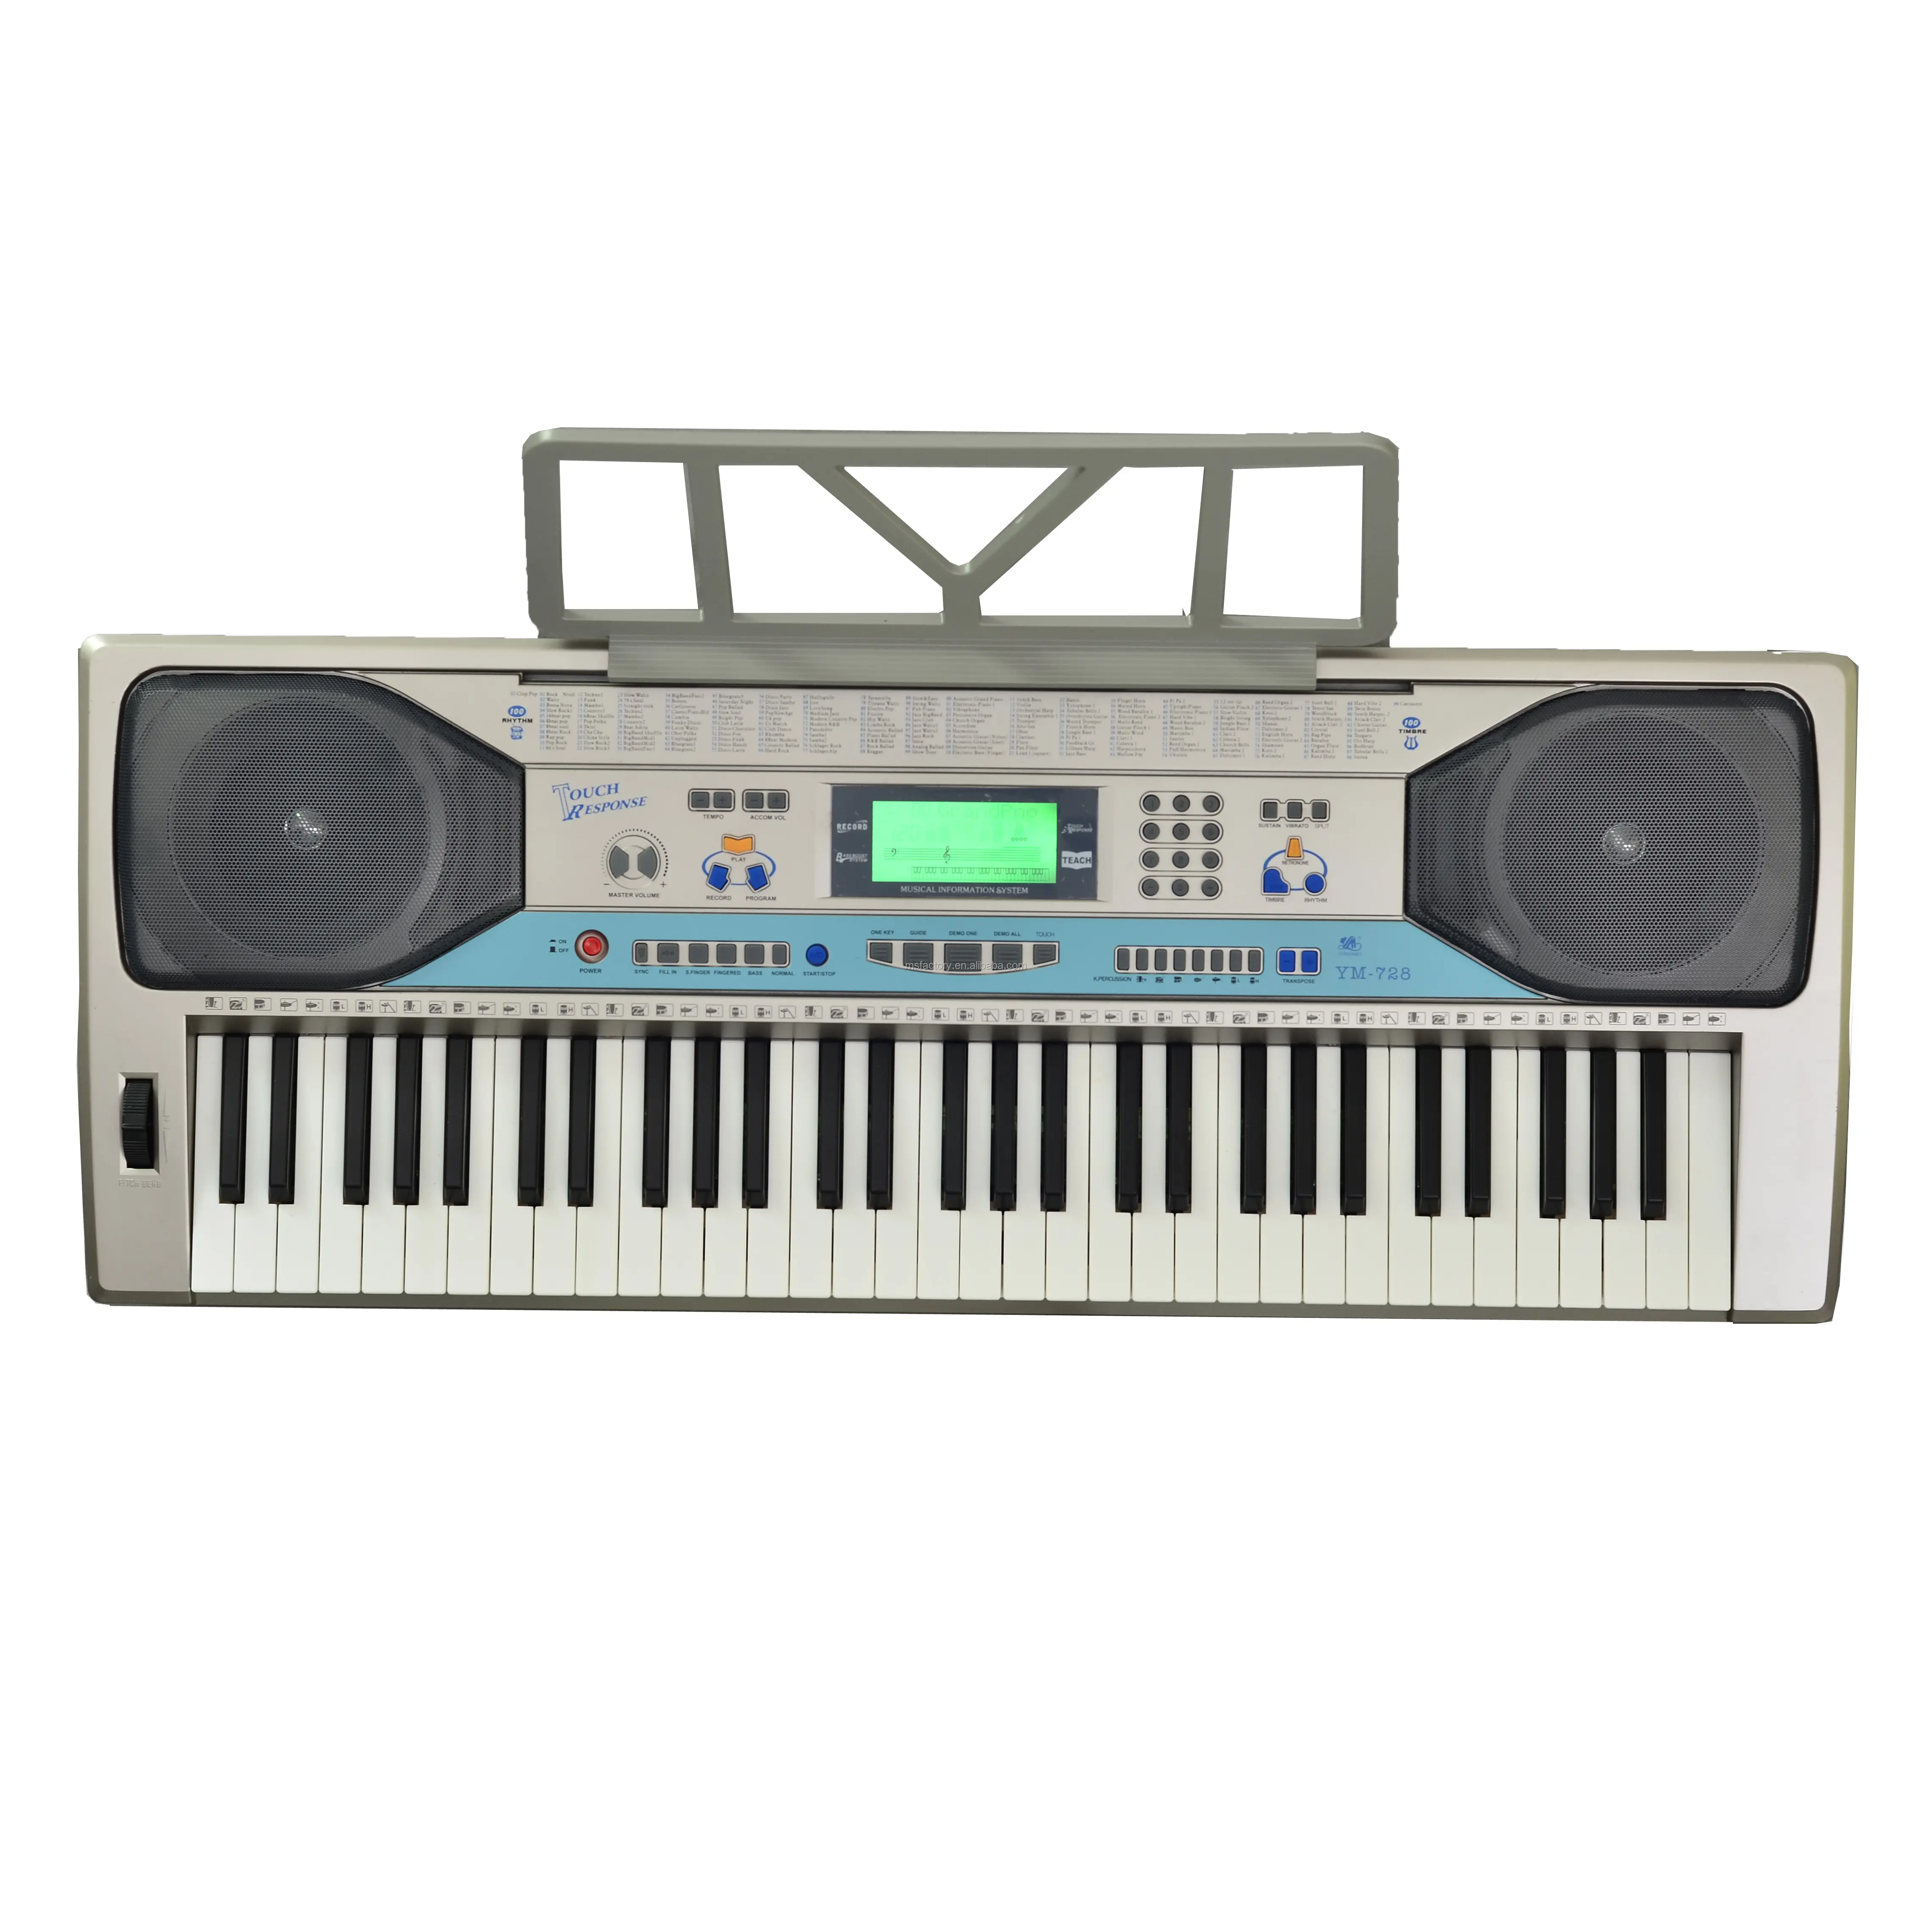 2019 Newest model musical instrument keyboard LCD display 61 keys touch response keyboard